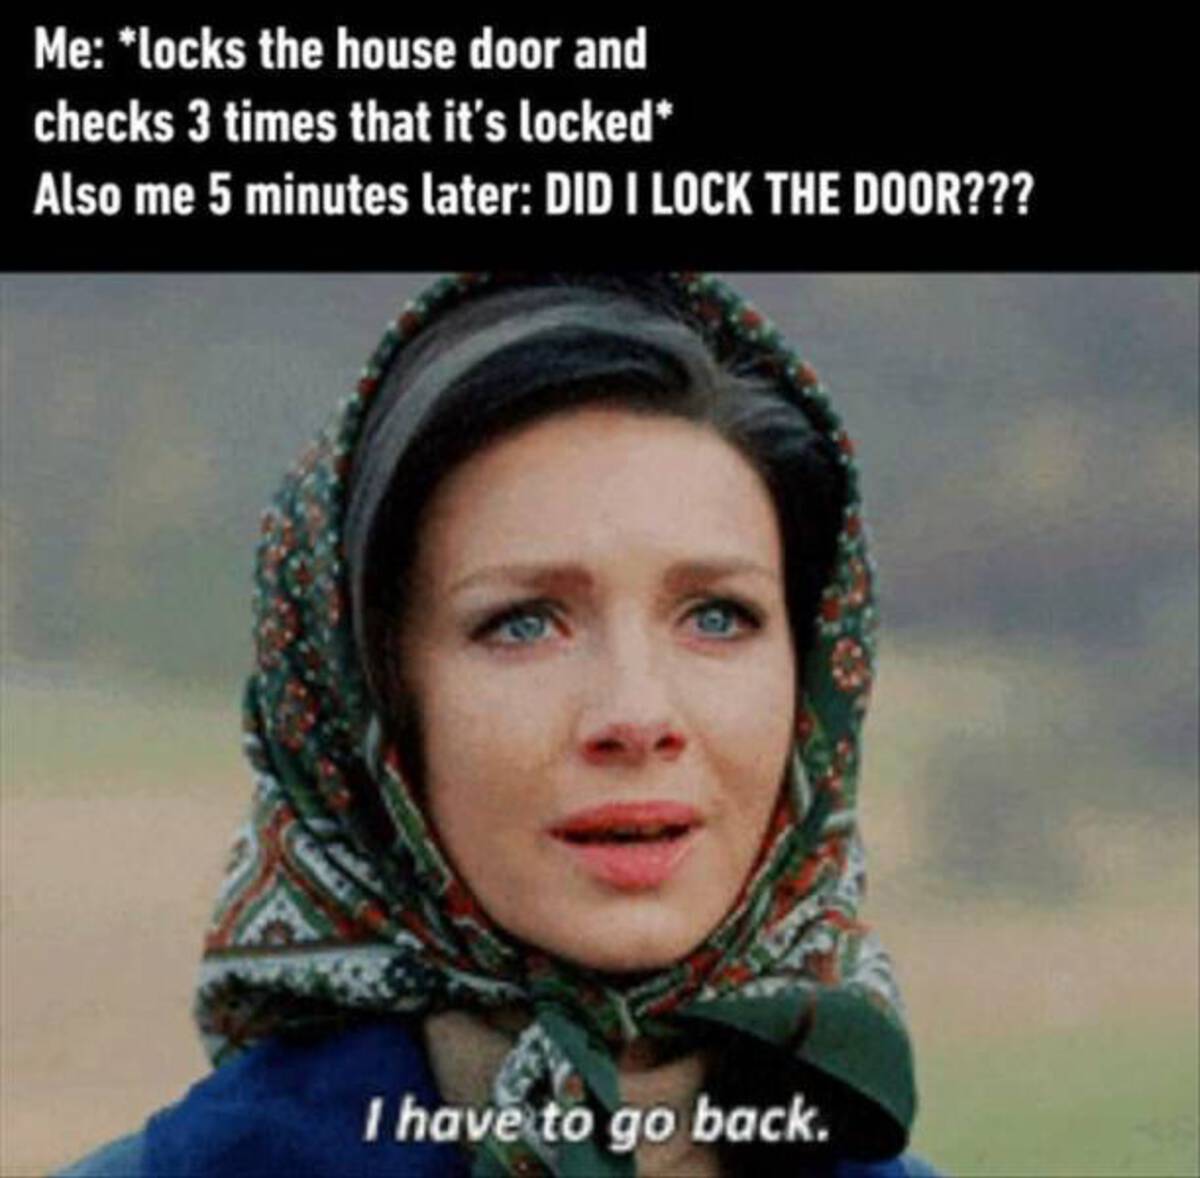 outlander book memes - Me locks the house door and checks 3 times that it's locked Also me 5 minutes later Did I Lock The Door??? I have to go back.